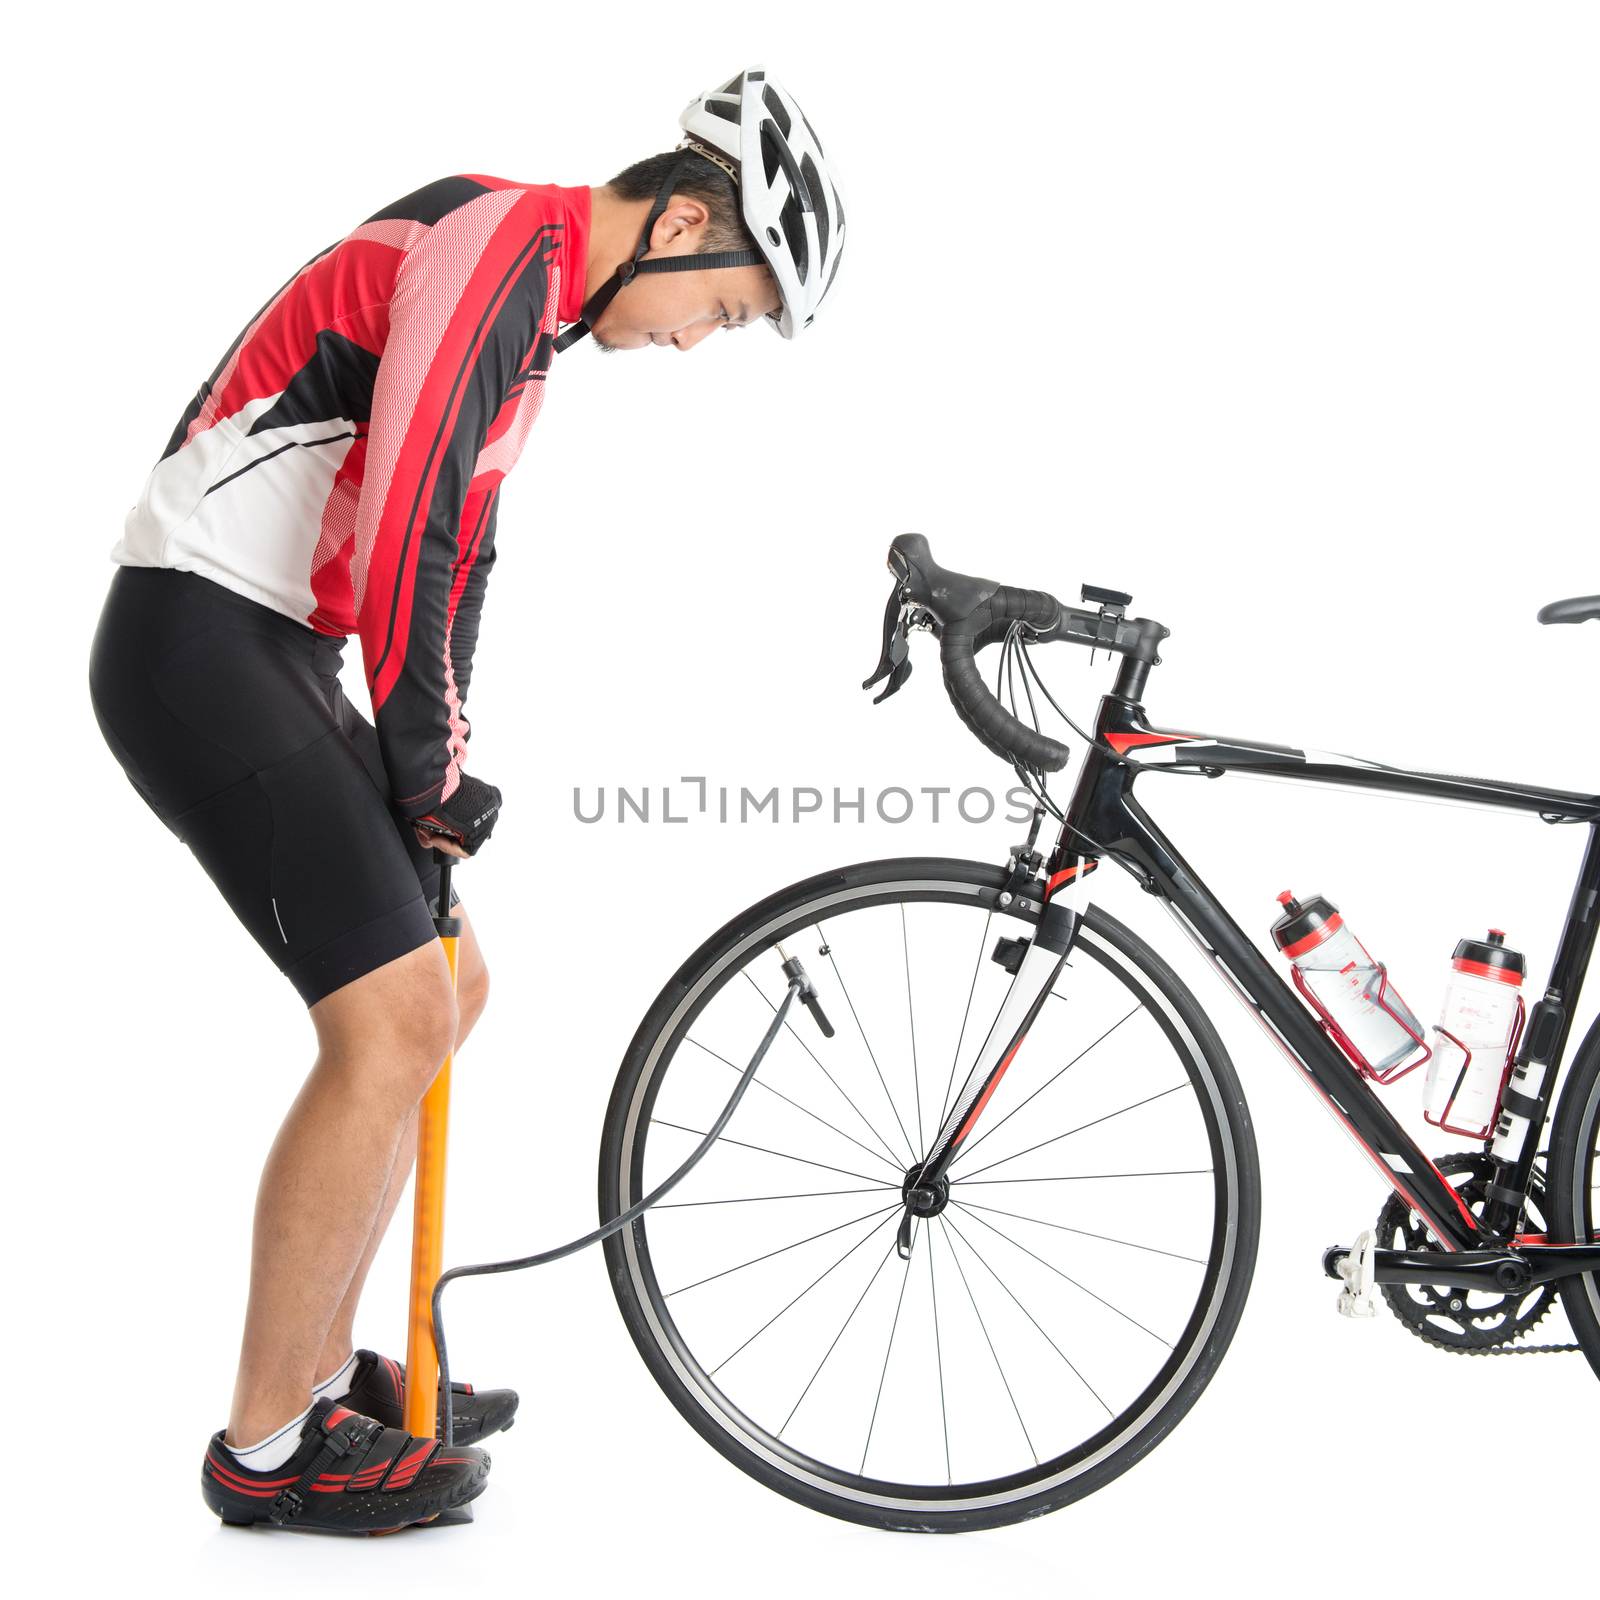 Asian cyclist pumping air to bike tire, using manual air-pump, isolated on white background.